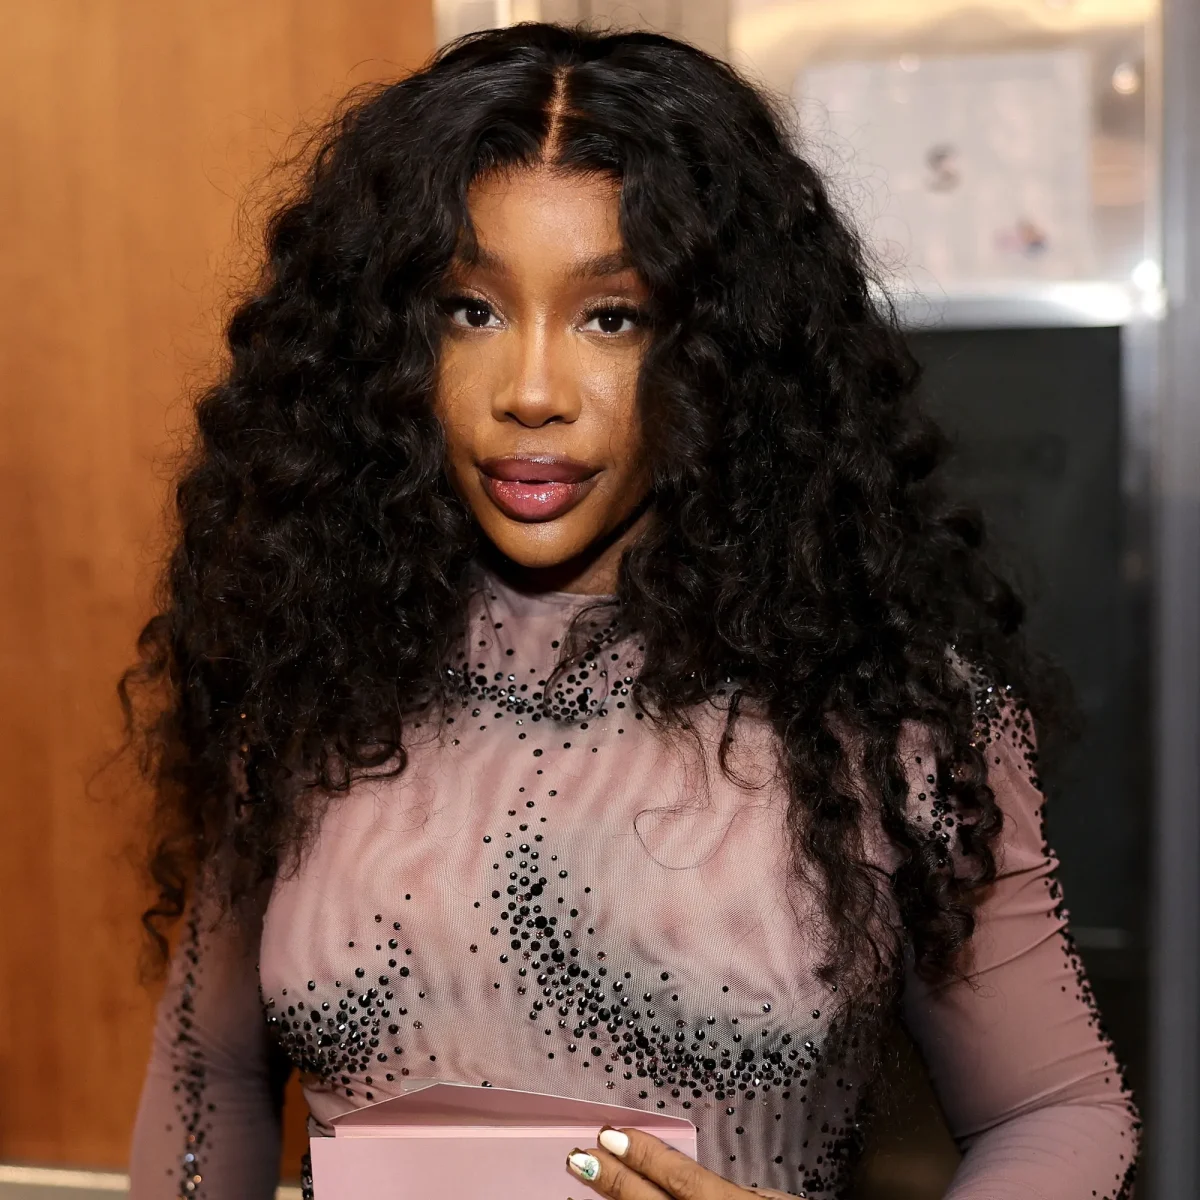 Sza Reacts To Fans' Unruly Behavior At Her Aussie Concert 7